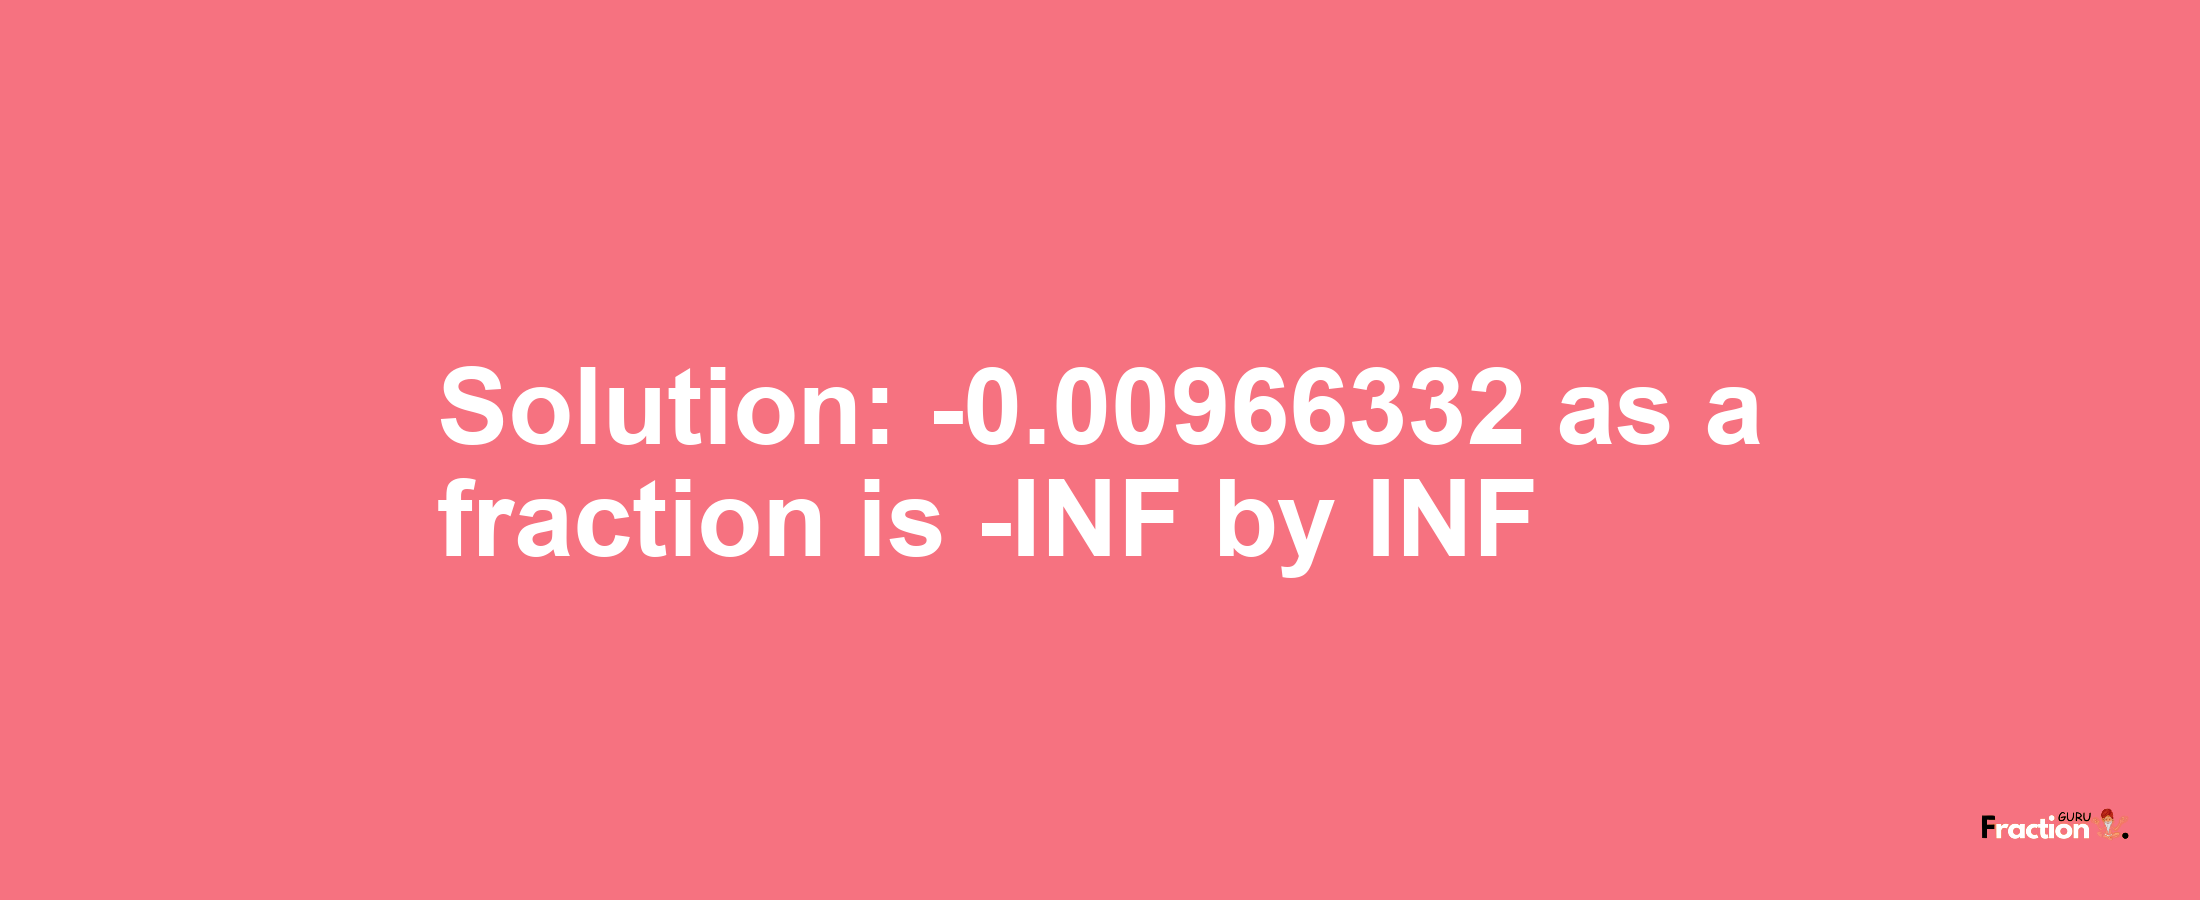 Solution:-0.00966332 as a fraction is -INF/INF